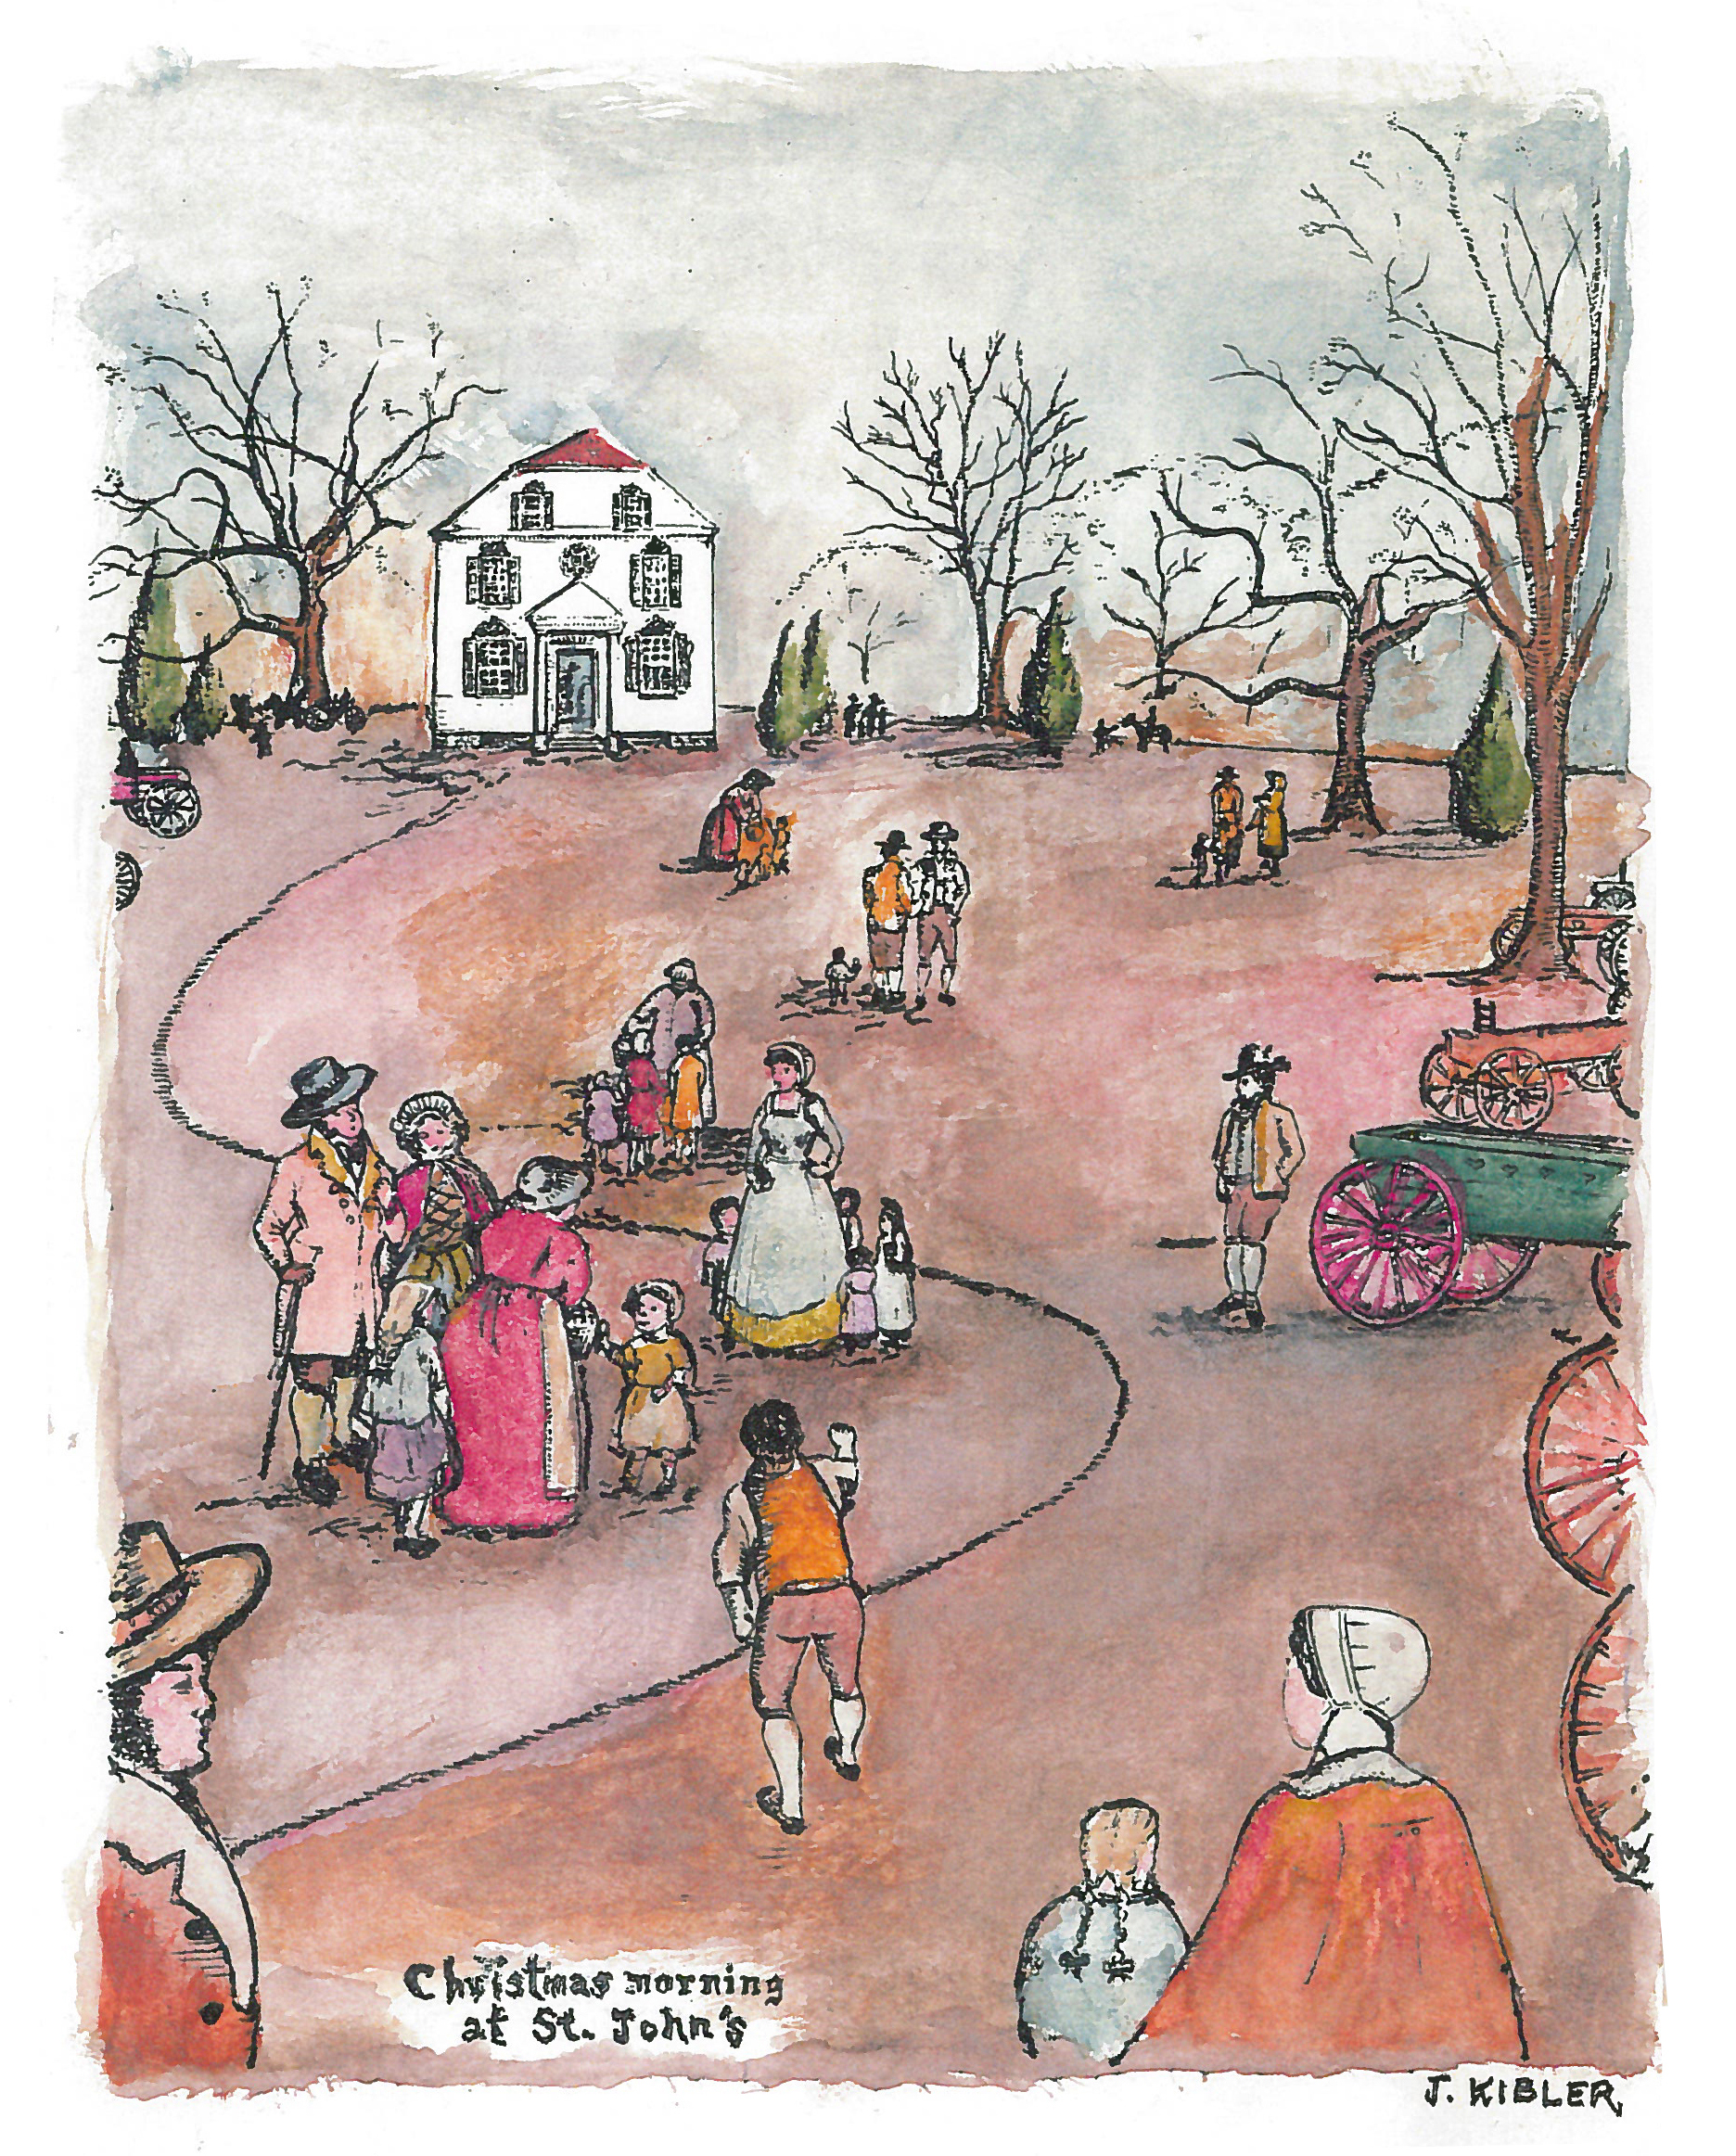  Gathering for Christmas services at St. John’s Lutheran Church, Pomaria, South Carolina. Illustrated by the author for Fireside Tales.